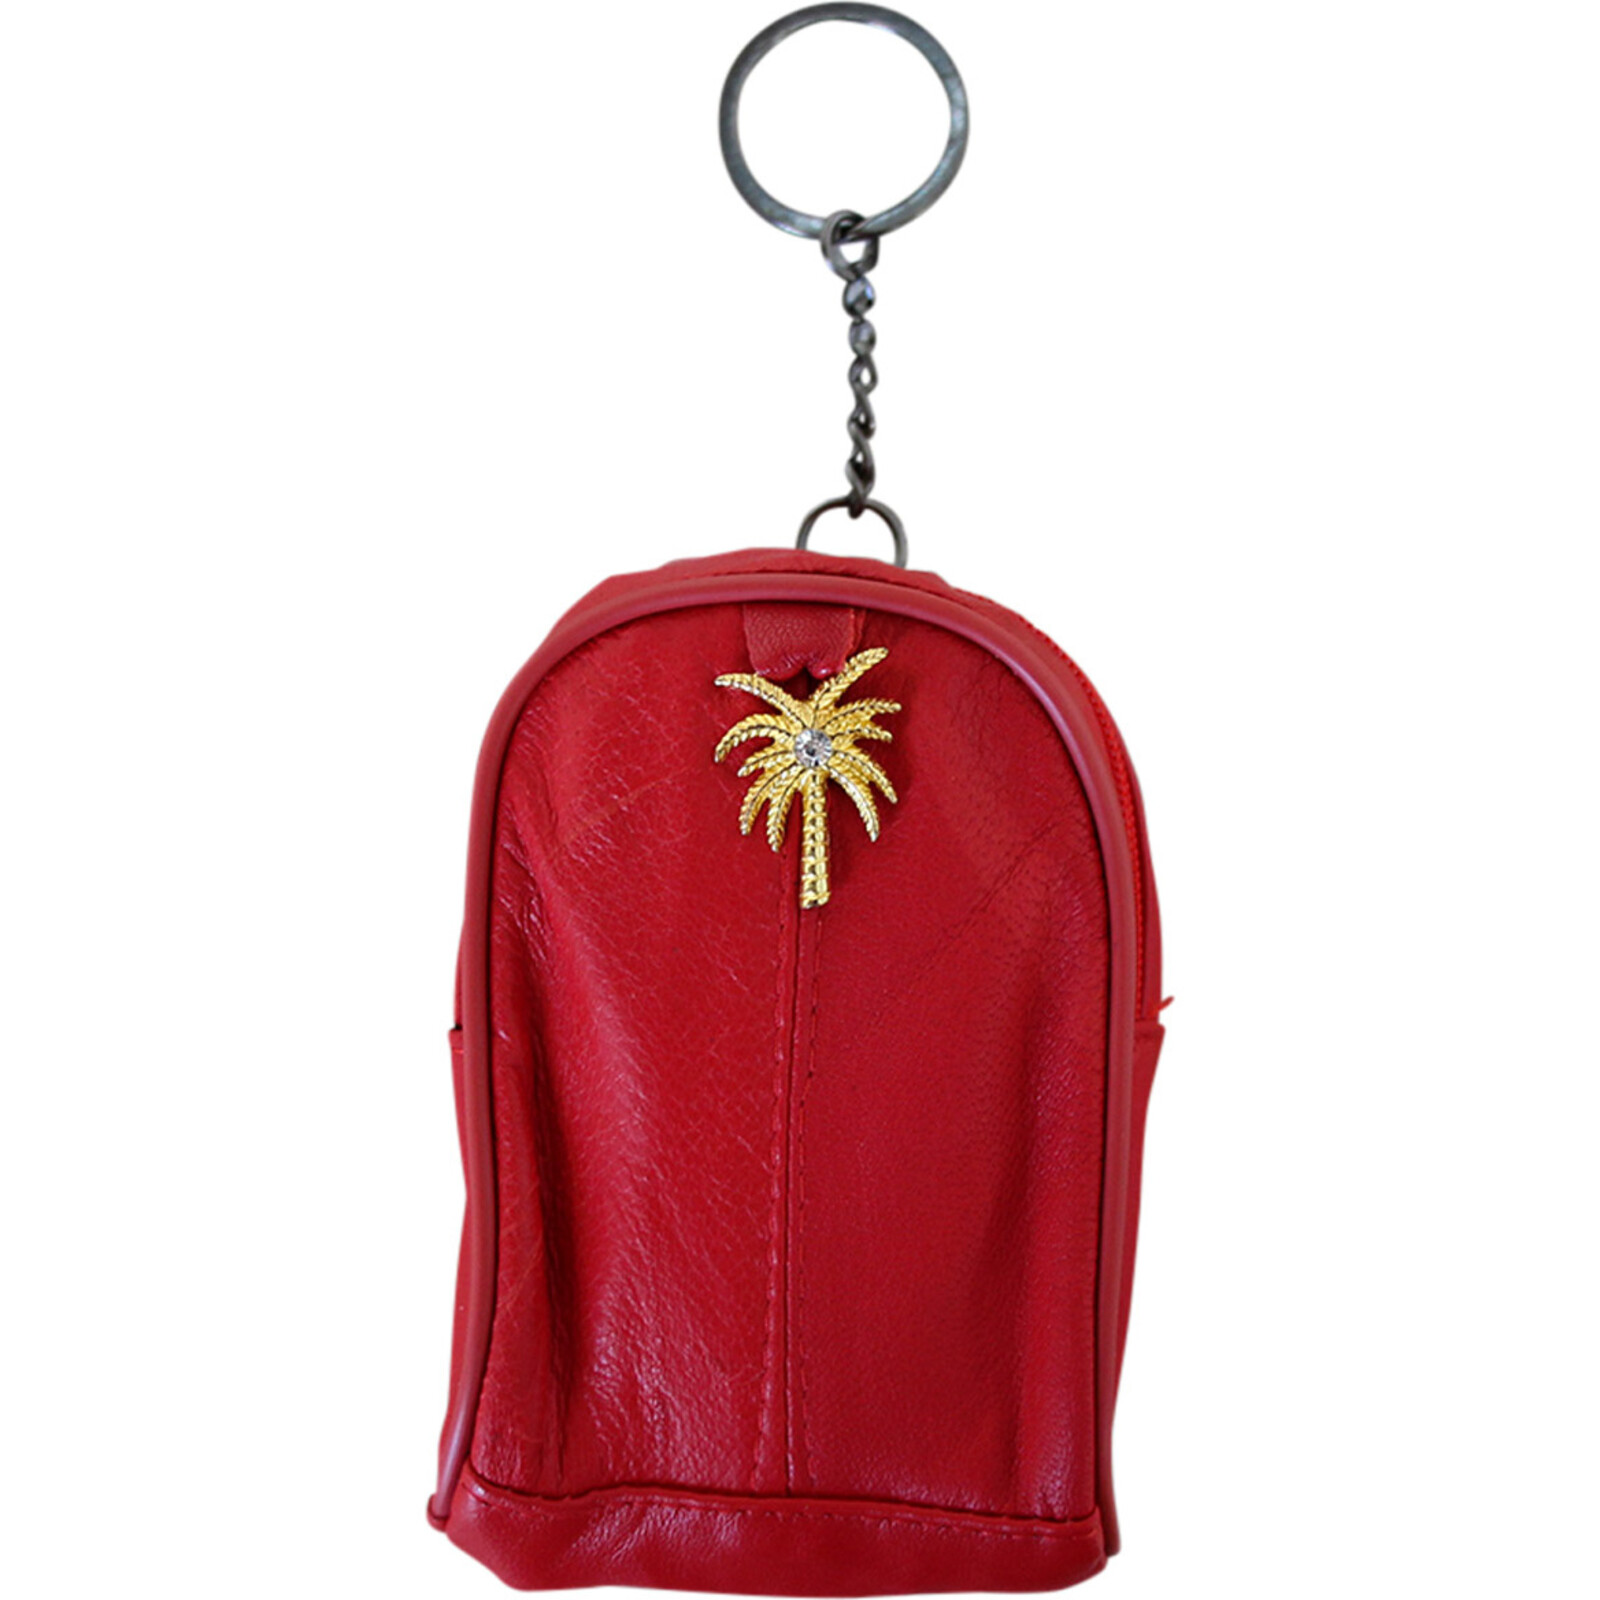 Reusable Shopping Bag Kit in Leather Palm Purse Red